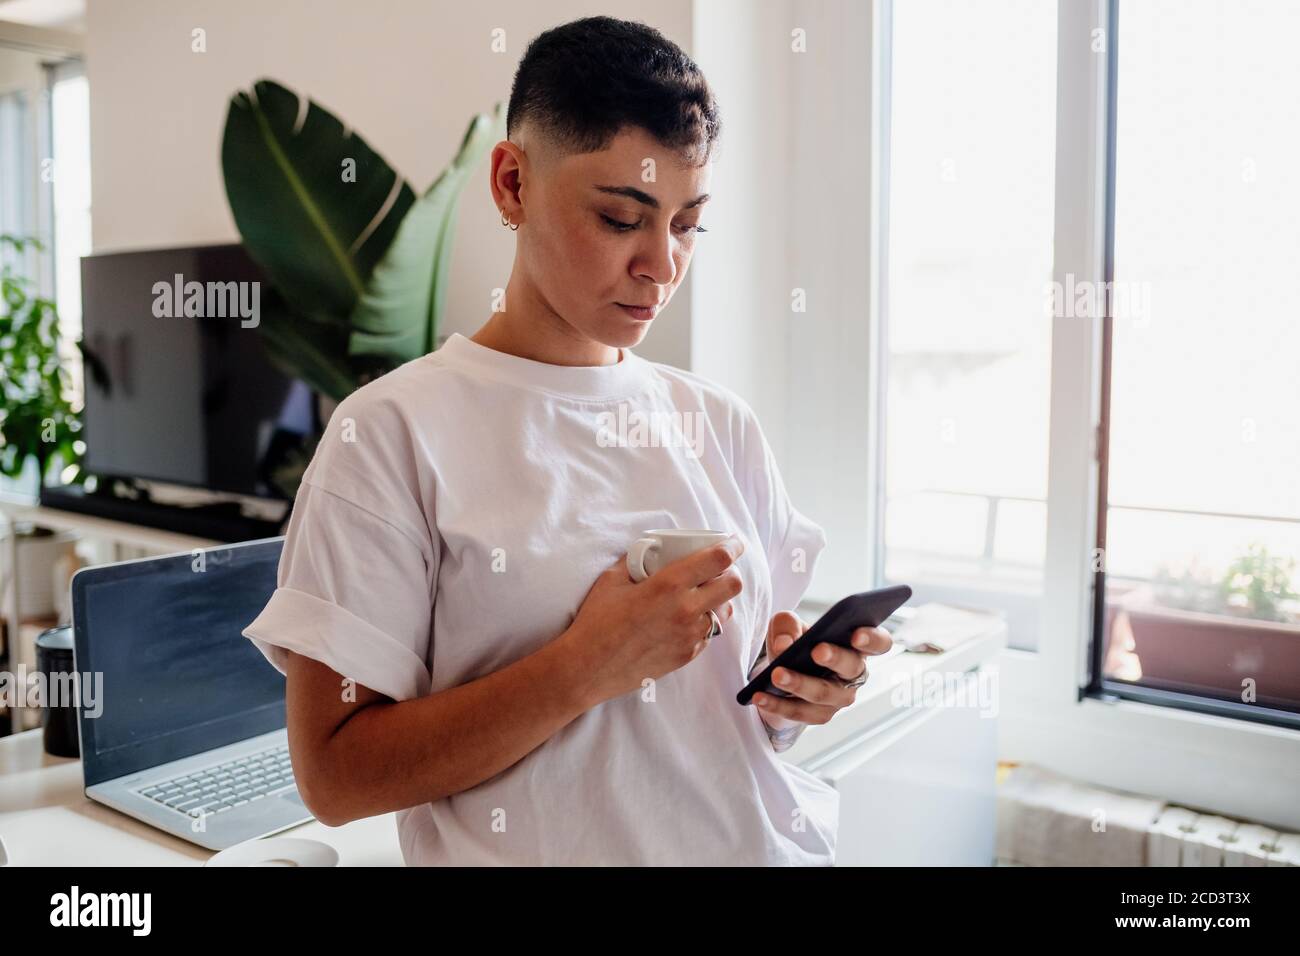 Young woman with shaved head standing in a kitchen, checking her mobile phone. Stock Photo